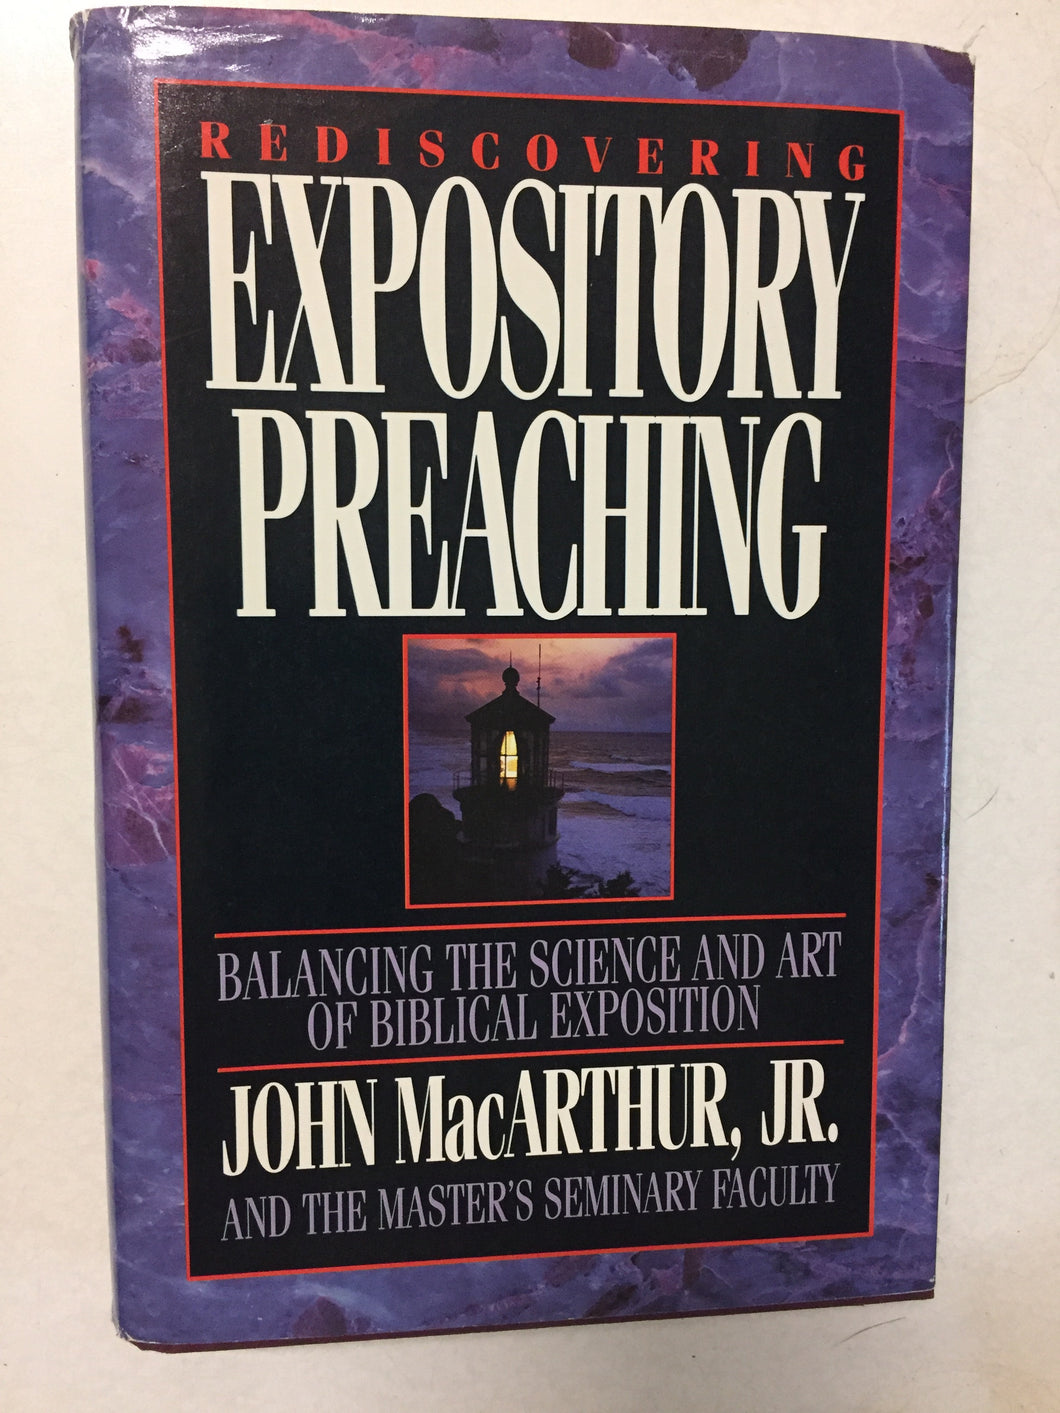 Rediscovering Expository Preaching - Slickcatbooks